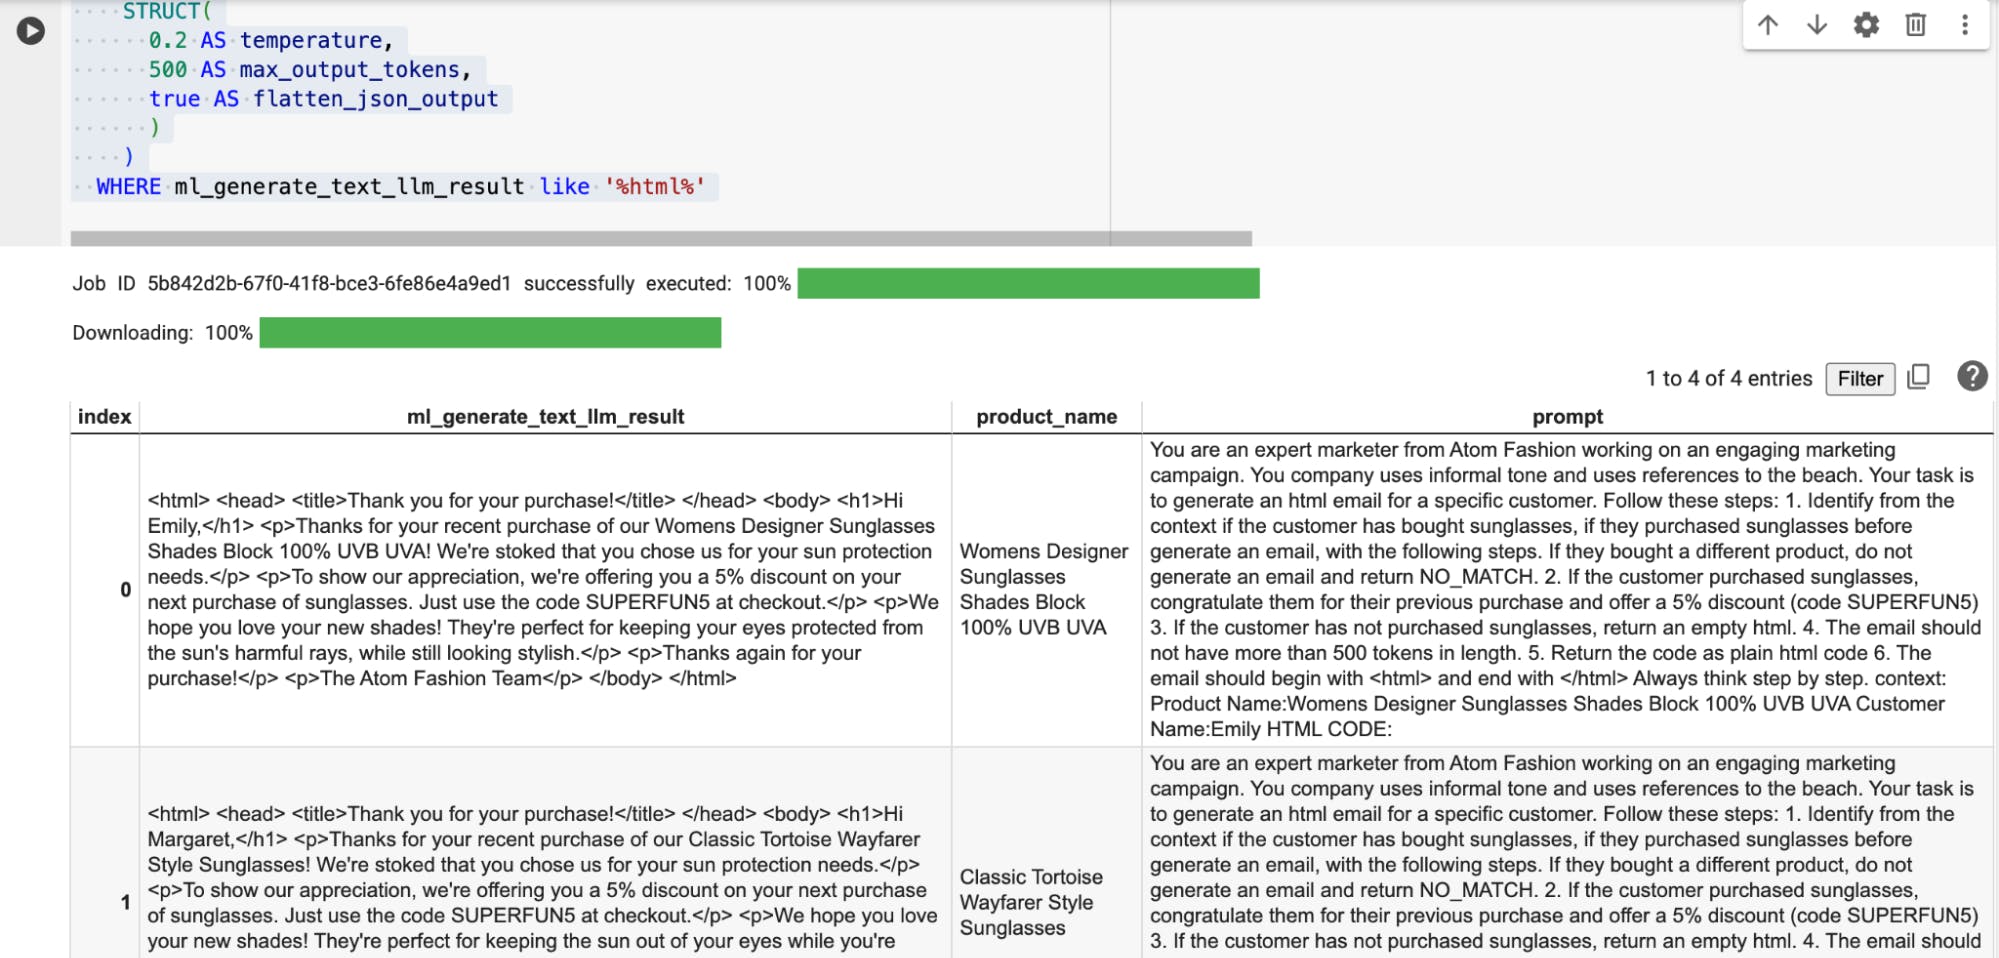 Screencap: HTML output from Google BigQuery&rsquo;s notebook